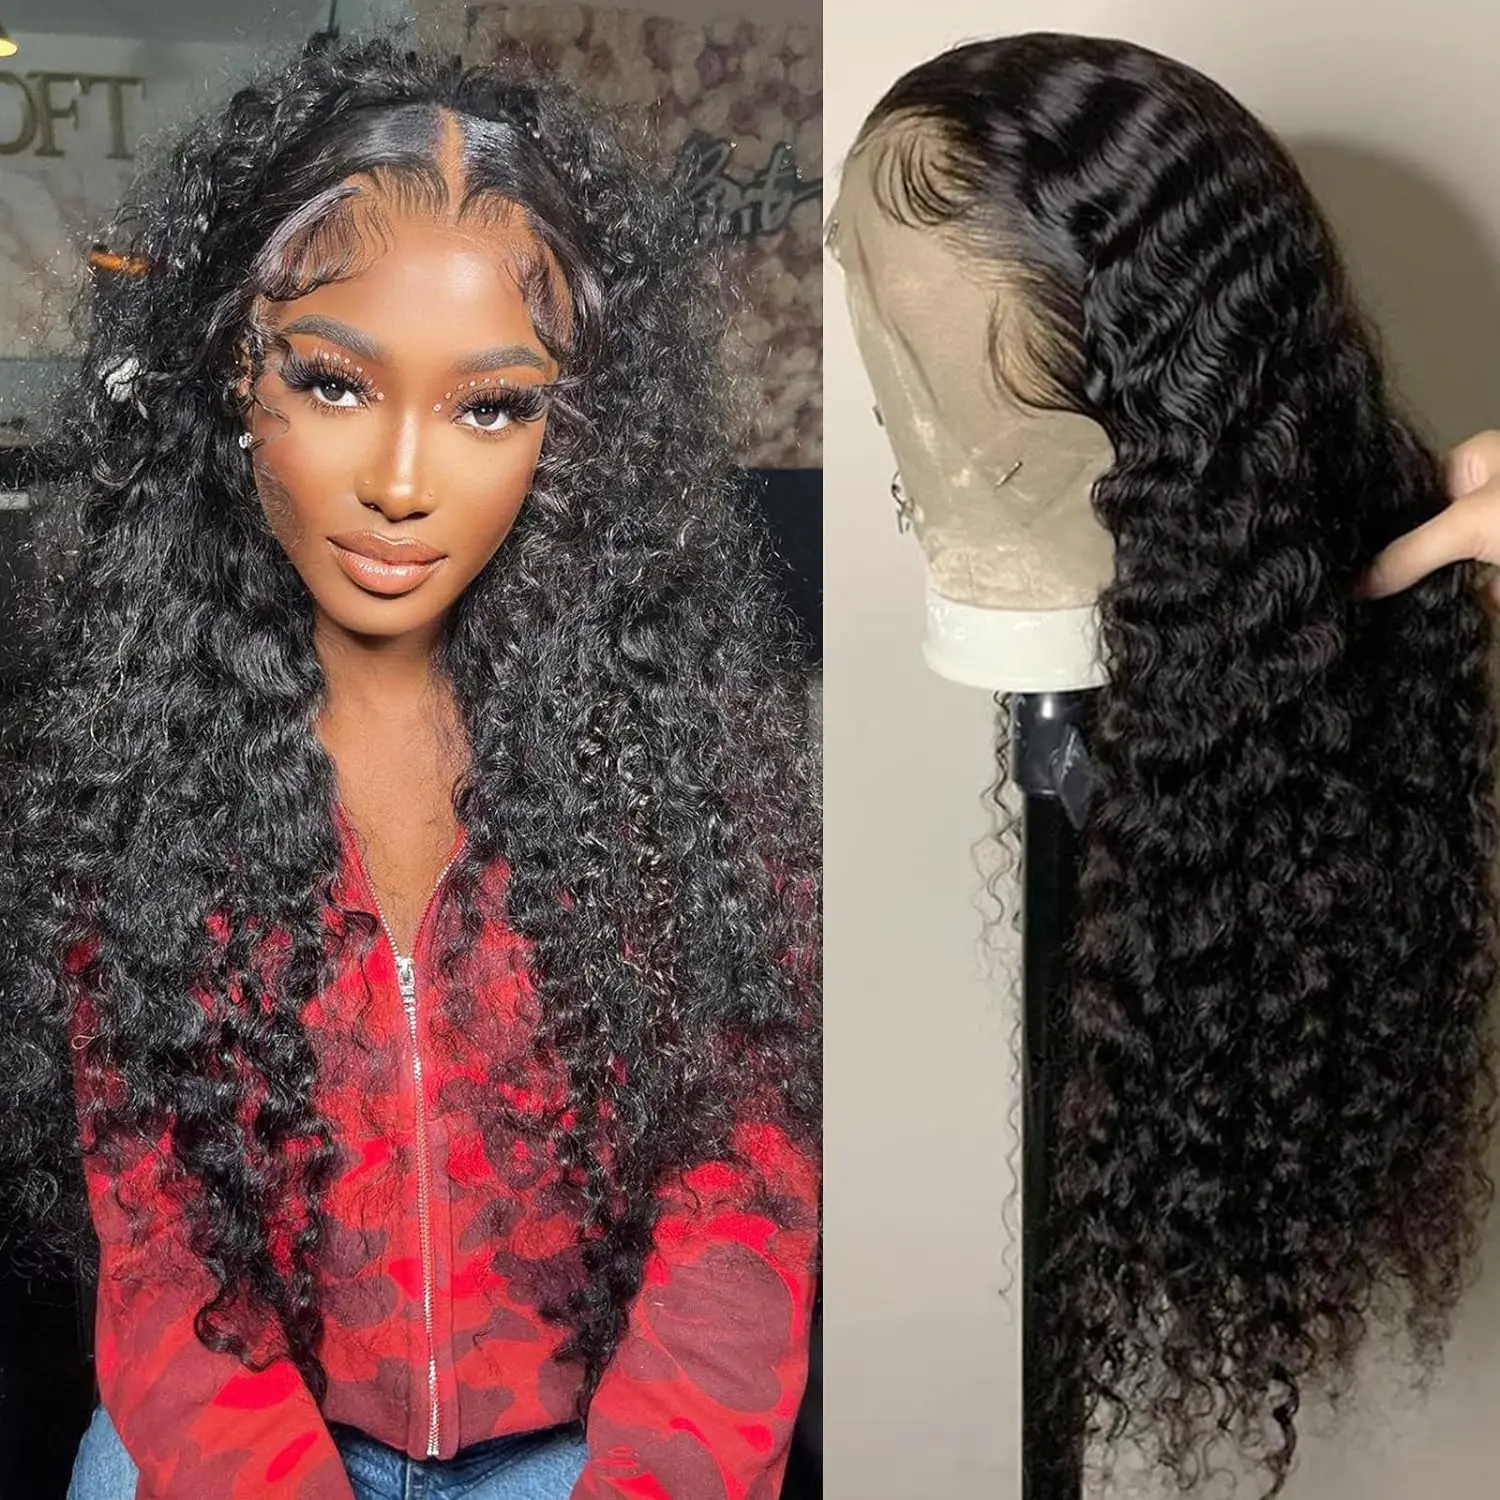 

360 Full Lace Human Hair Wig Pre Plucked 13x4 Deep Wave Frontal Wigs For Black Women 13x6 Hd Curly Water Wave Lace Front Wig